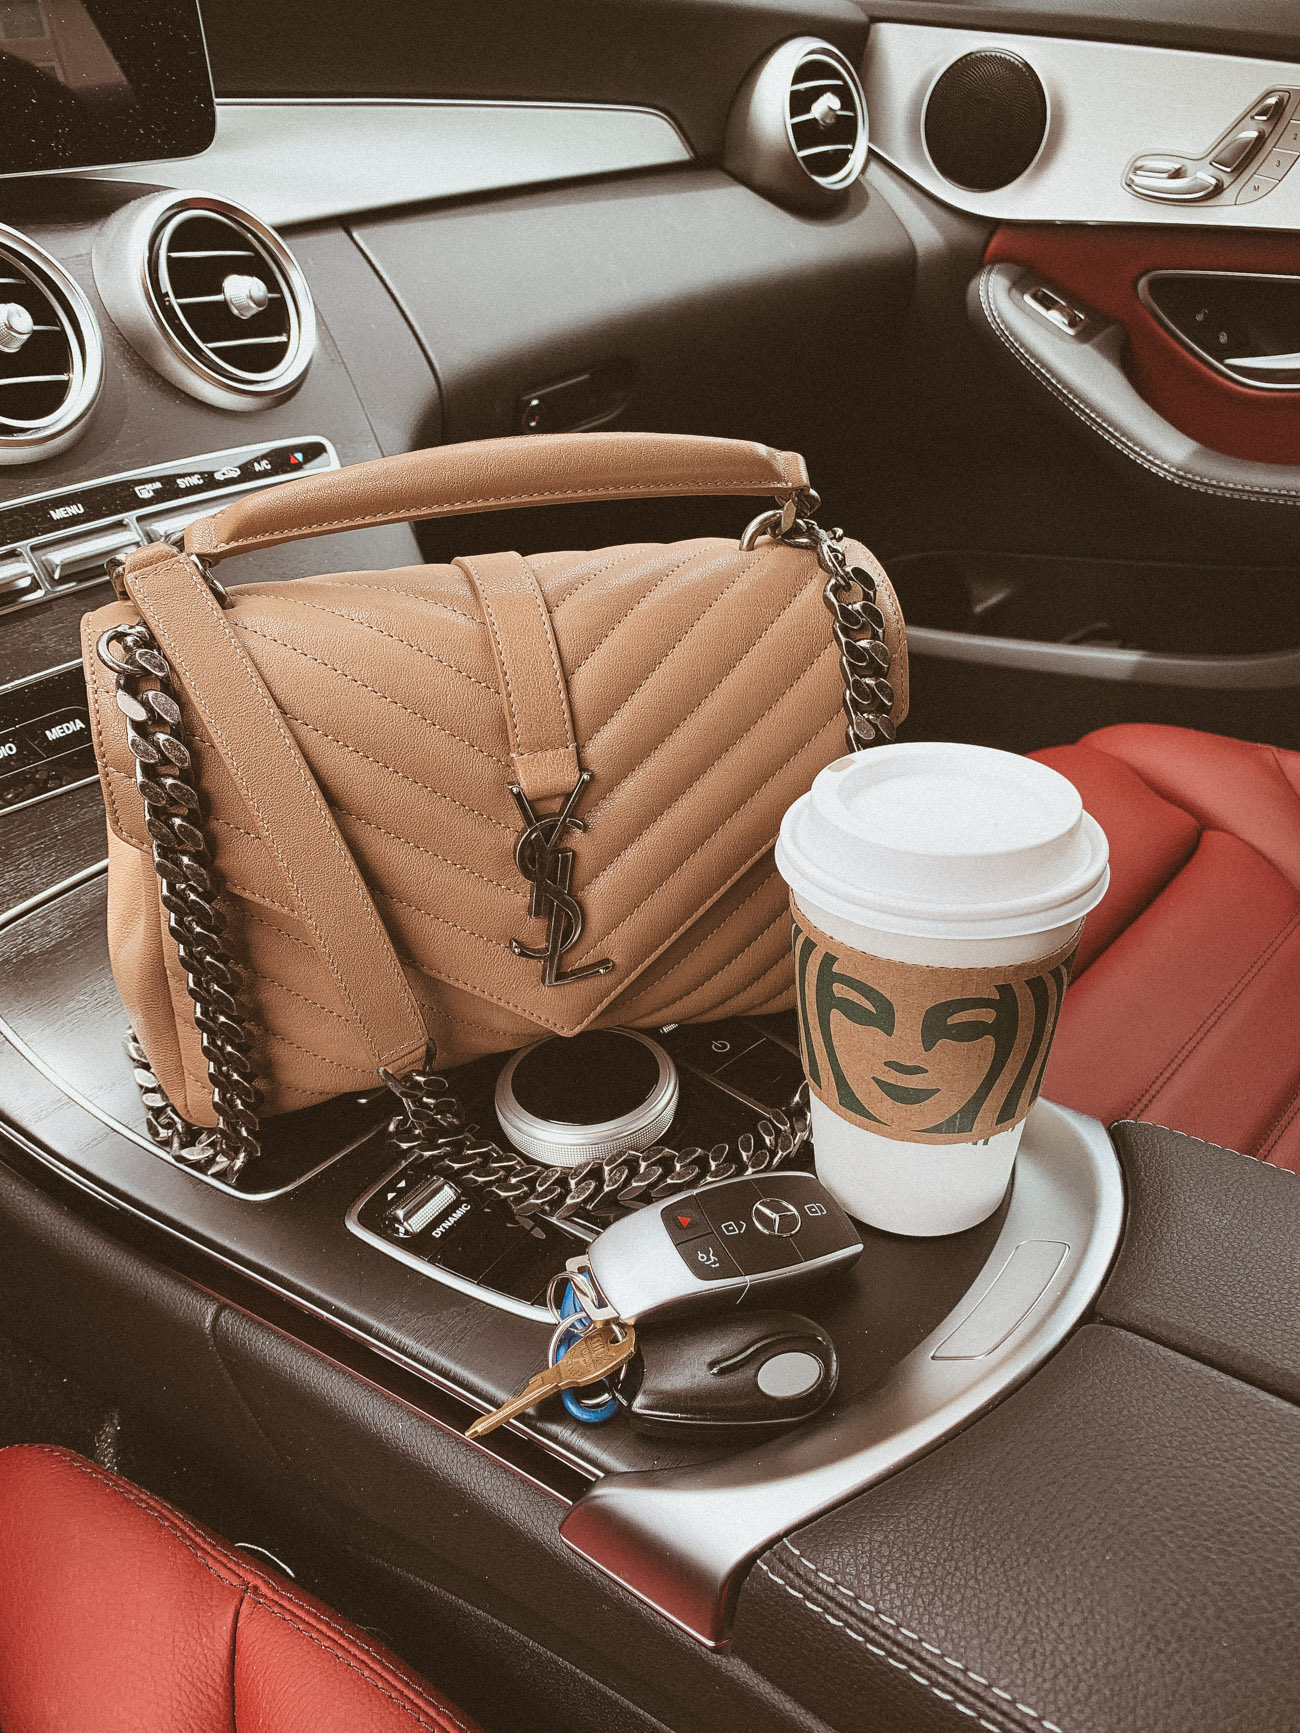 YSL Medium College Bag | Taupe Bag | YSL Bag Review | Mercedes Benz | Photo Inso | Blondie in the City by Hayley Larue